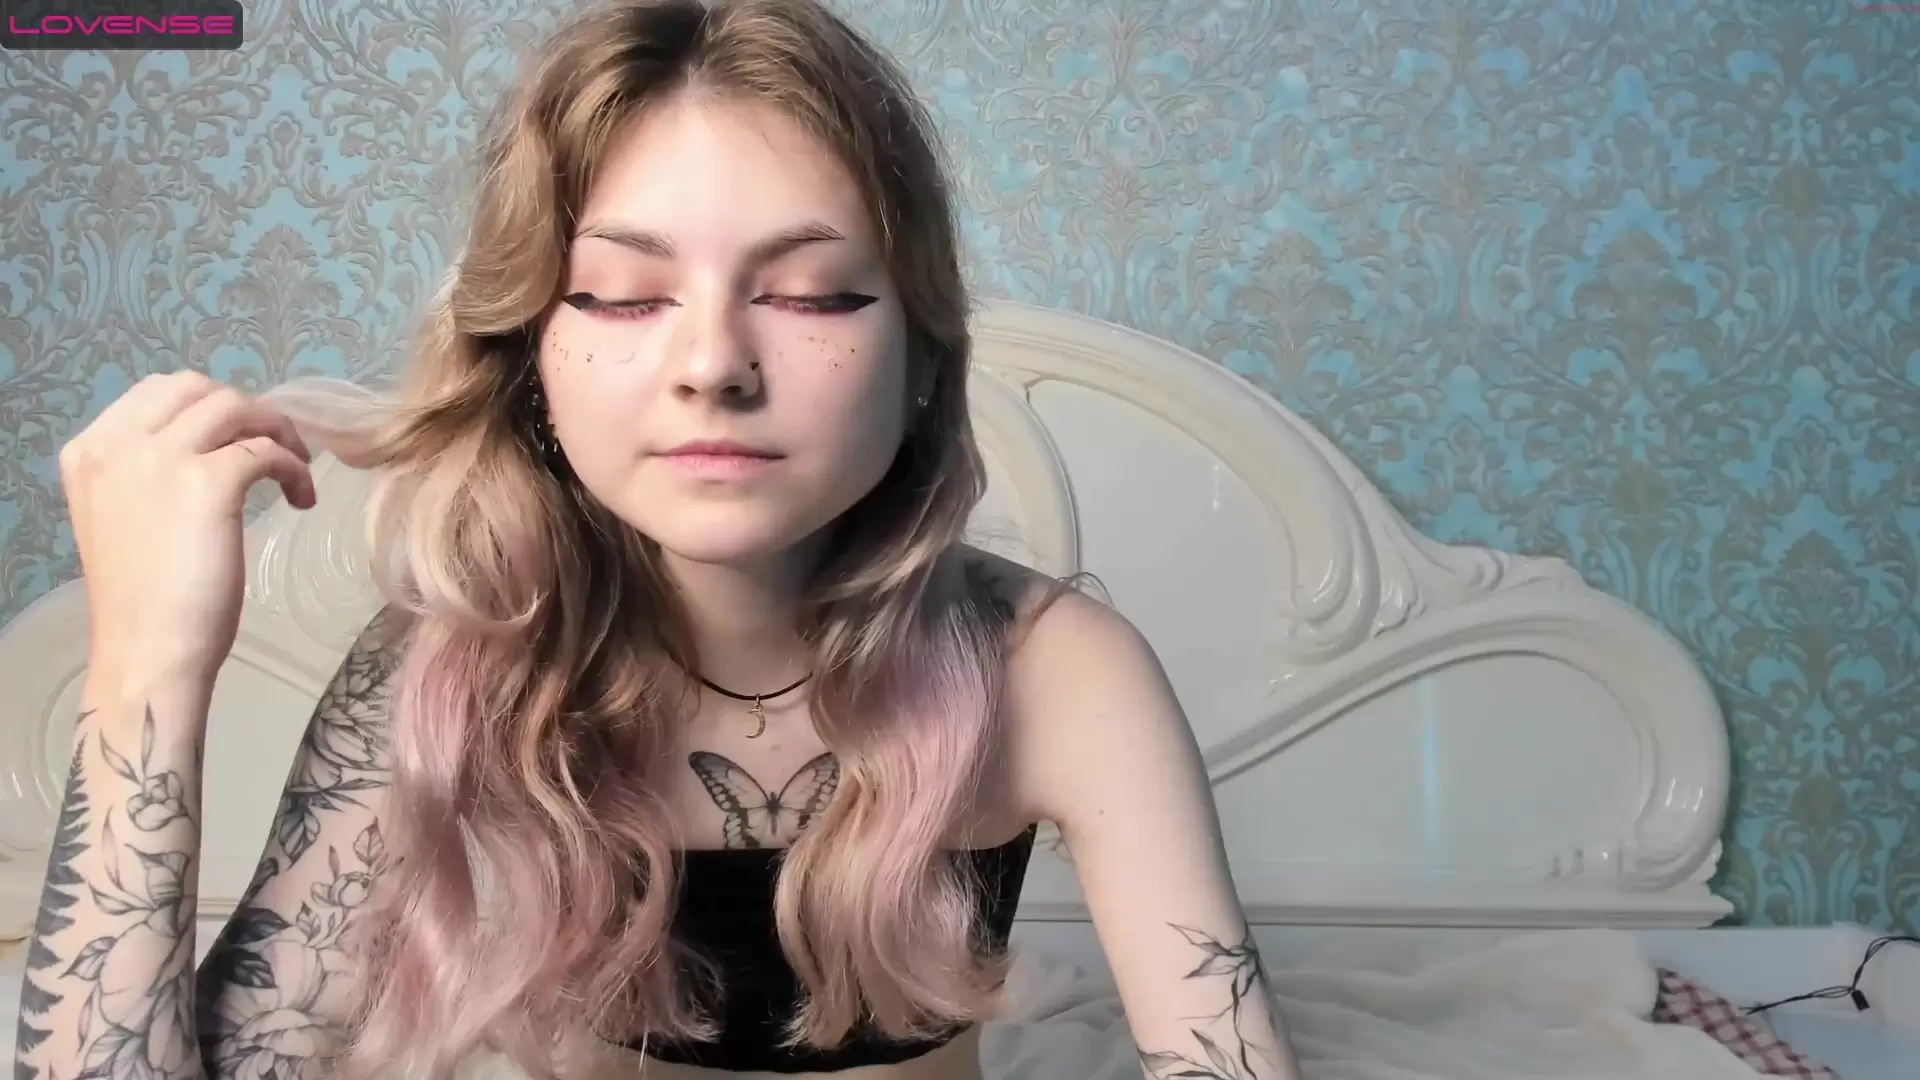 1920px x 1080px - Lostallice - [Chaturbate] Free Porn Only Fun Club Video Playing On Live  Webcam